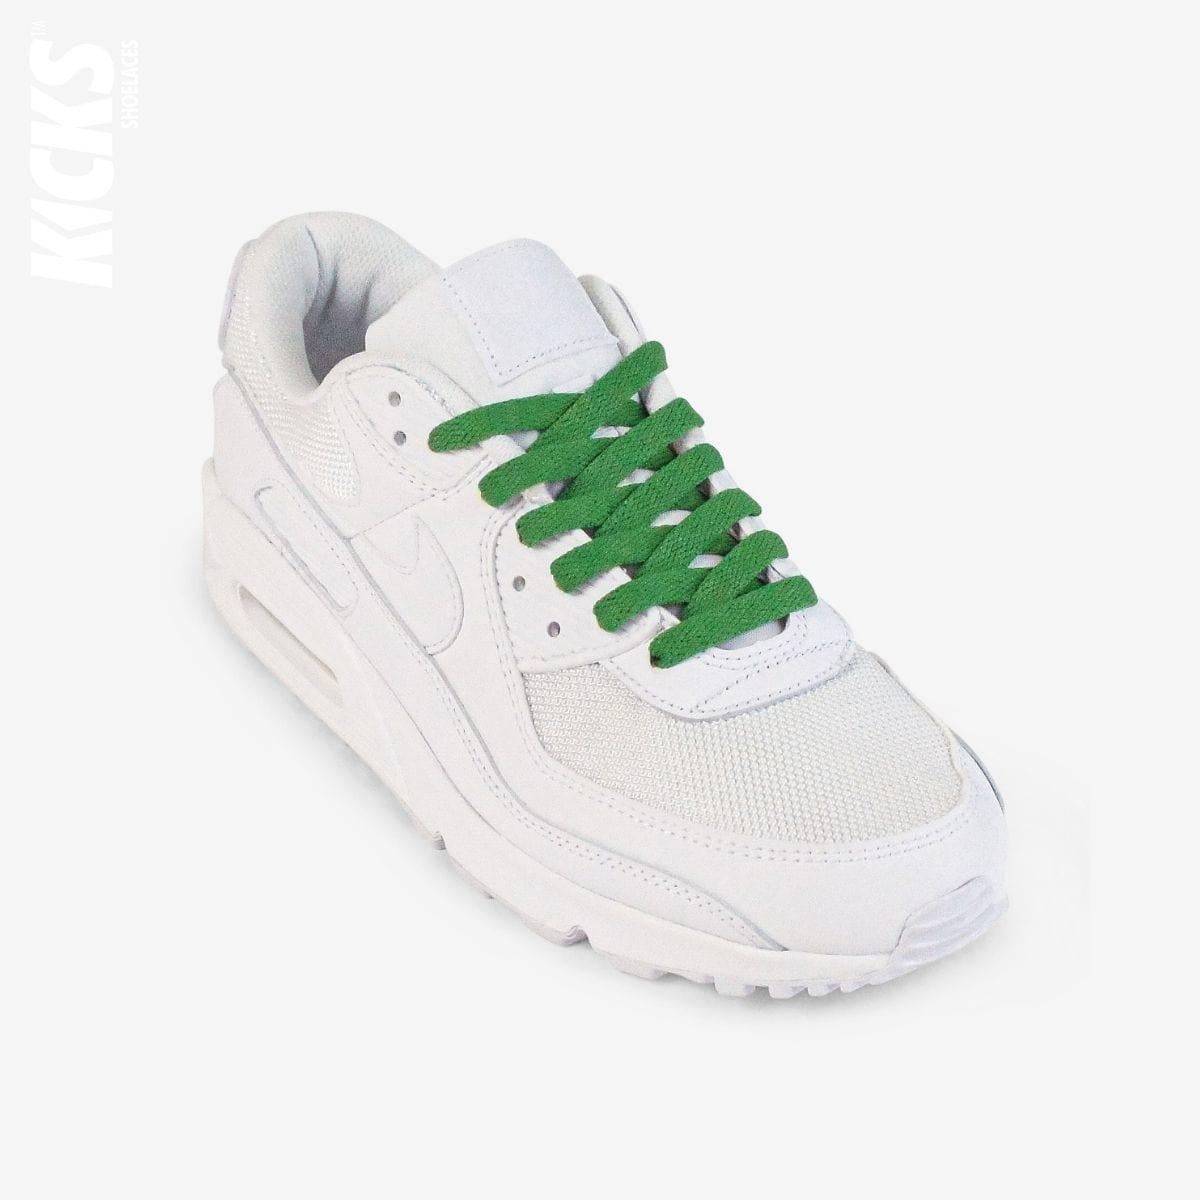 novelty-shoelaces-on-white-sneaker-using-kids-green-flat-shoelaces